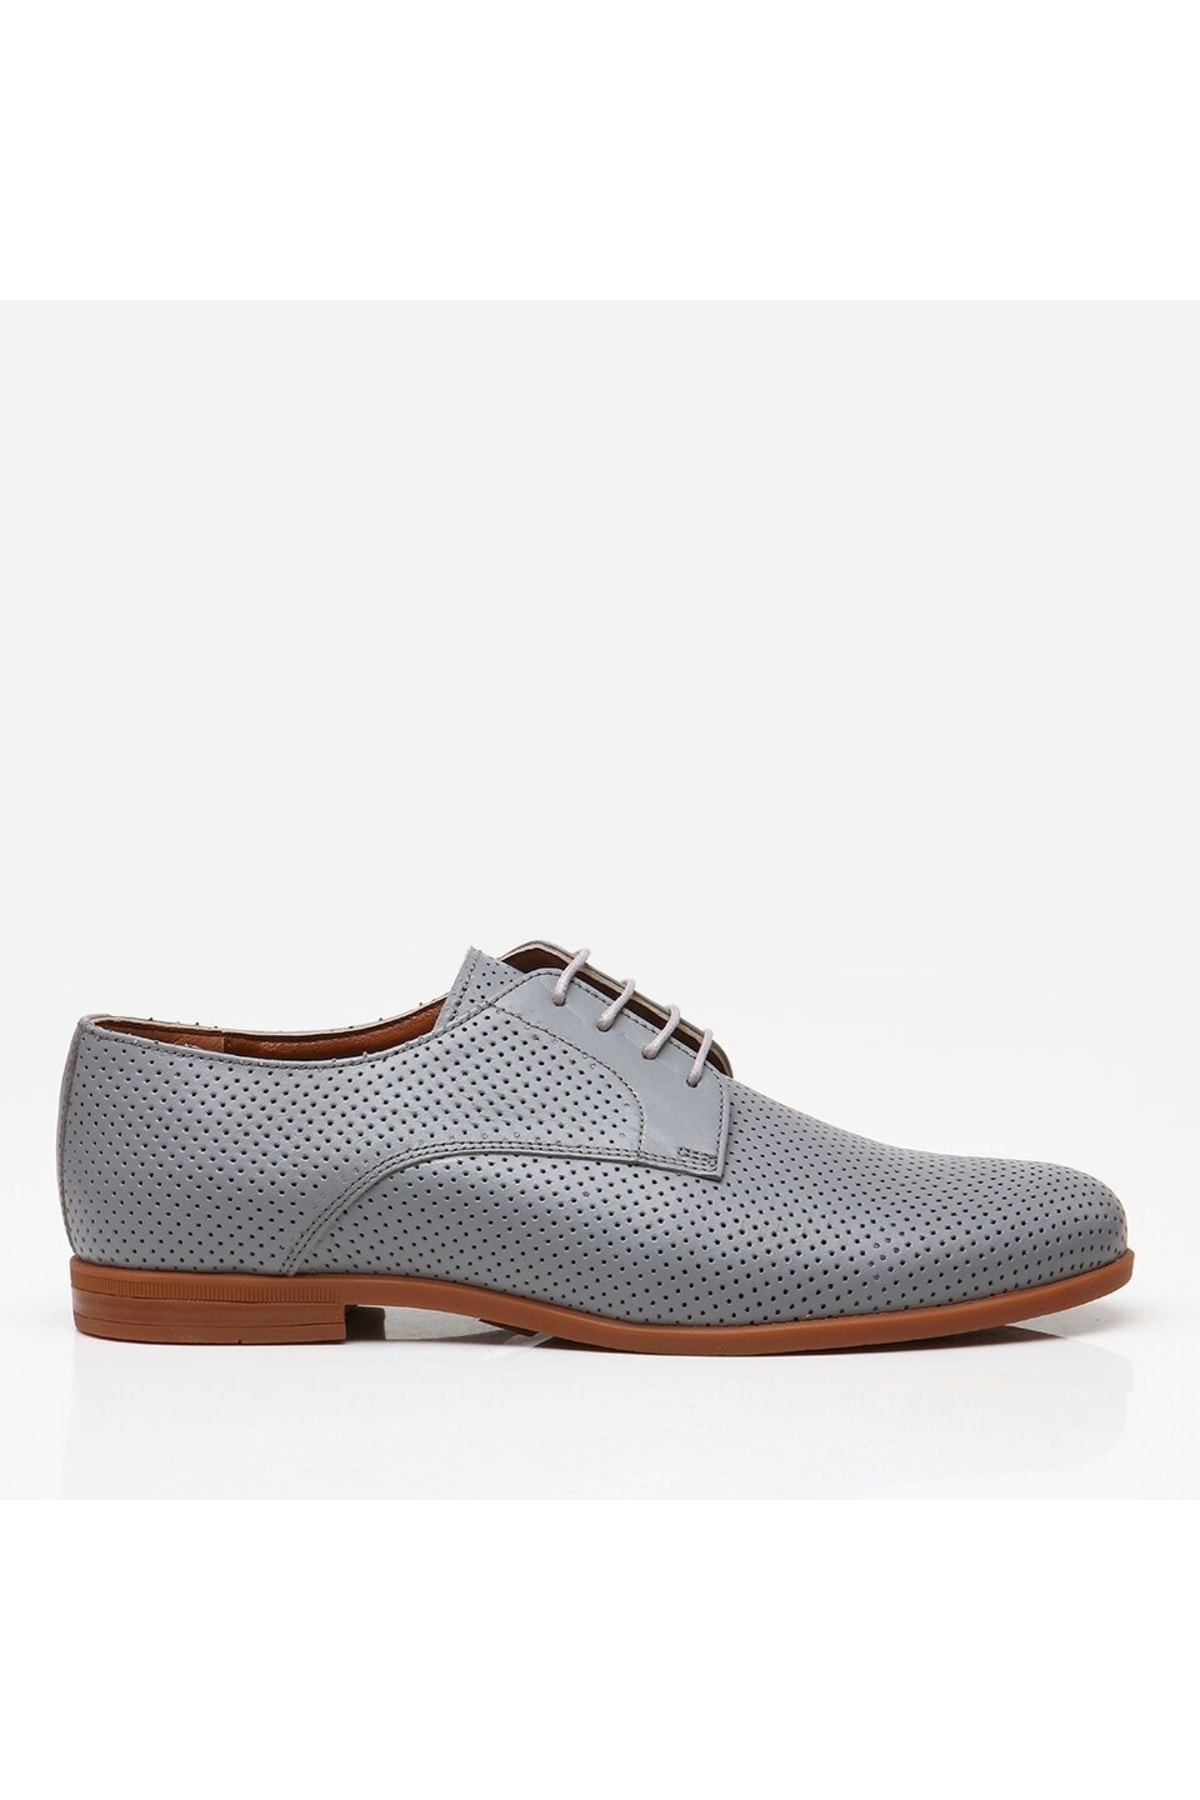 Hotiç Genuine Leather Gray Men's Casual Shoes